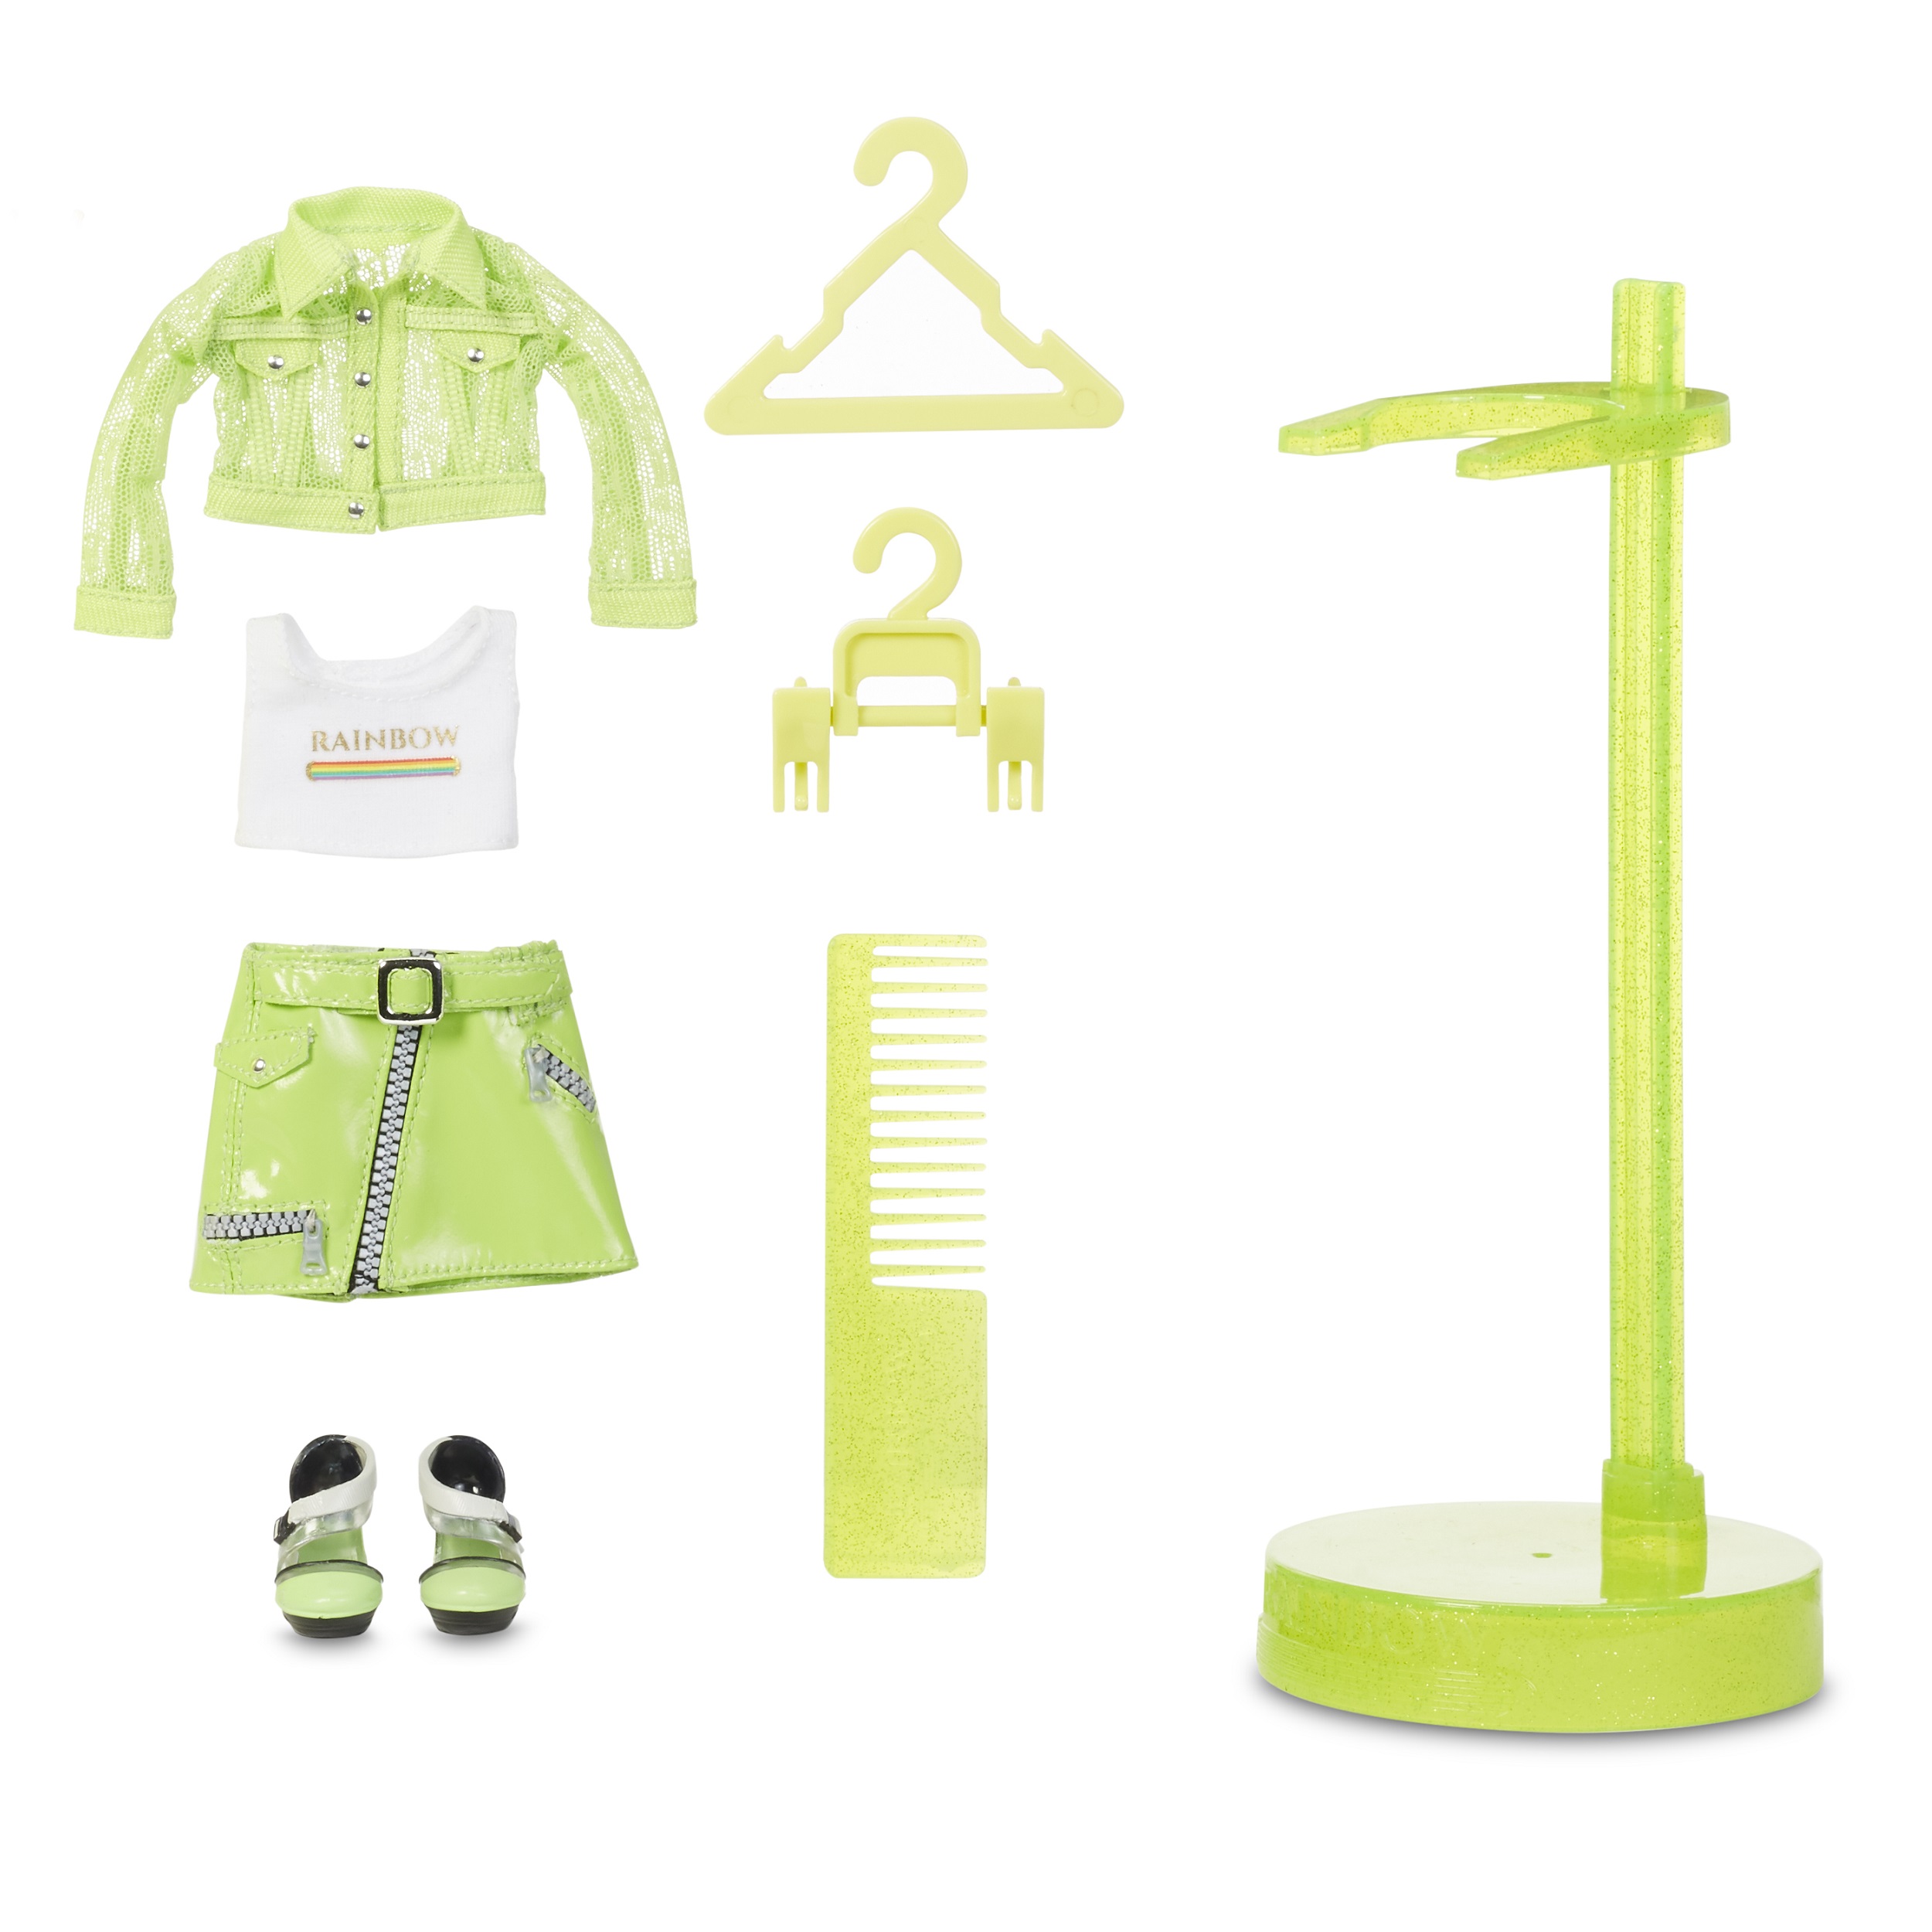 Rainbow High Karma Nichols – Neon Green Fashion Doll with 2 Complete Mix & Match Outfits and Accessories, Toys for Kids 6-12 Years Old - image 9 of 9